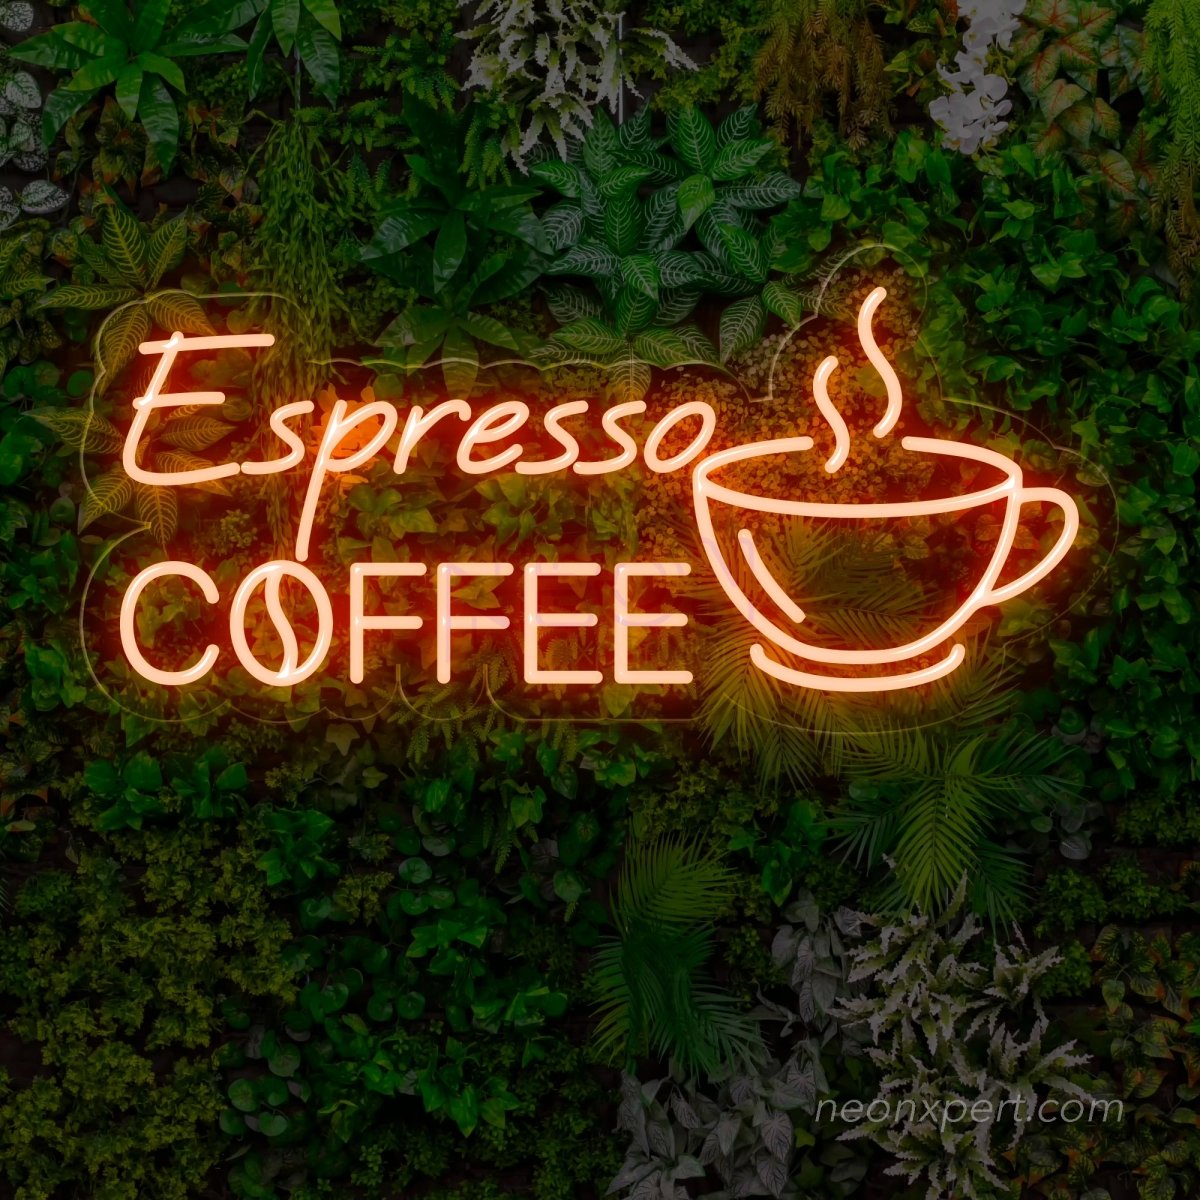 Espresso Coffee Neon Sign - Brew Your Space - NeonXpert